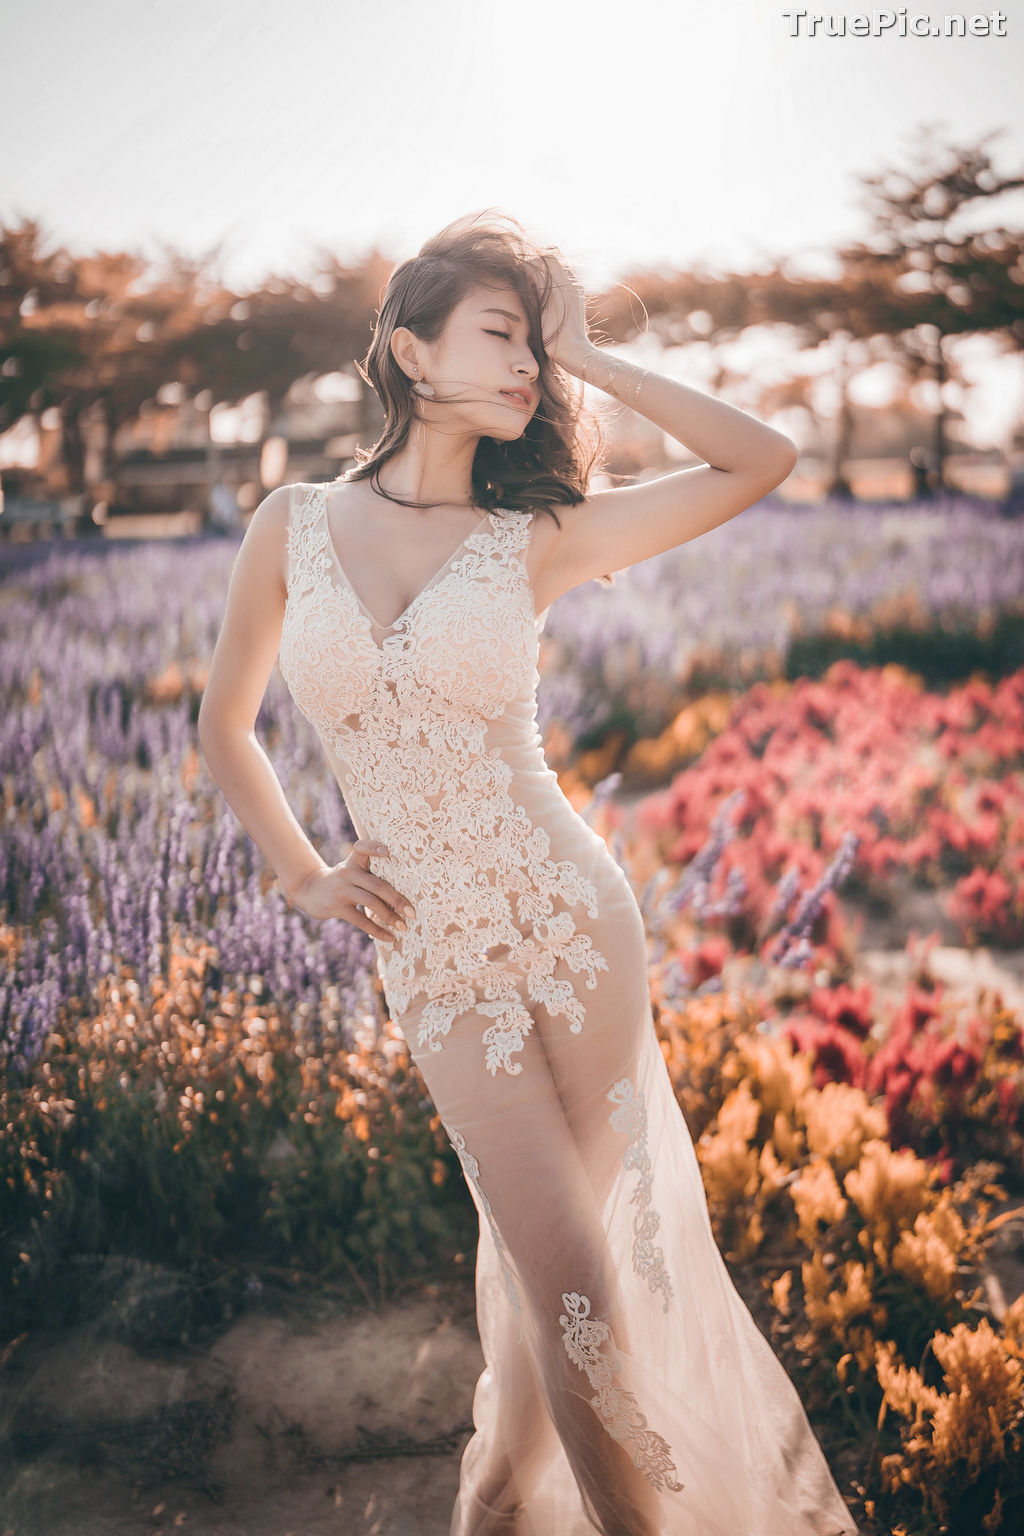 Image Taiwanese Model - 珈伊Femi - Sexy Beautiful Girl at Hollyhock Garden - TruePic.net - Picture-12